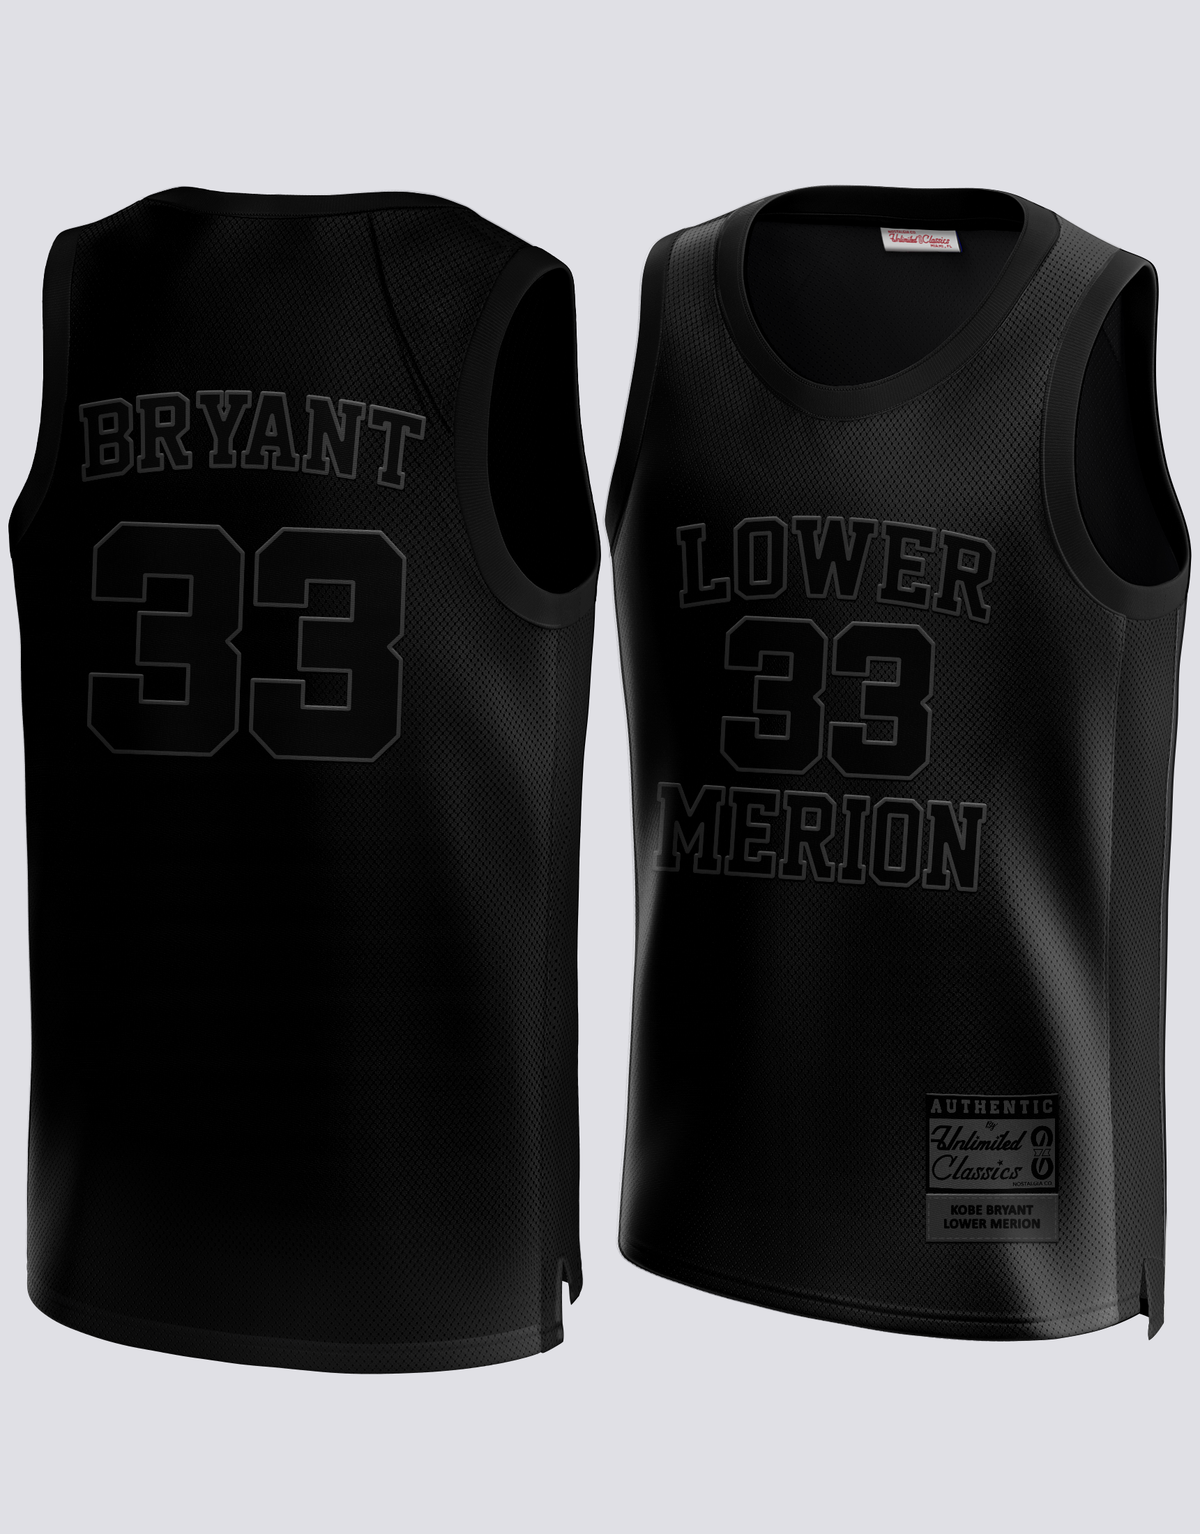 Kobe Bryant #33 Lower Merion Limited Edition Jersey L